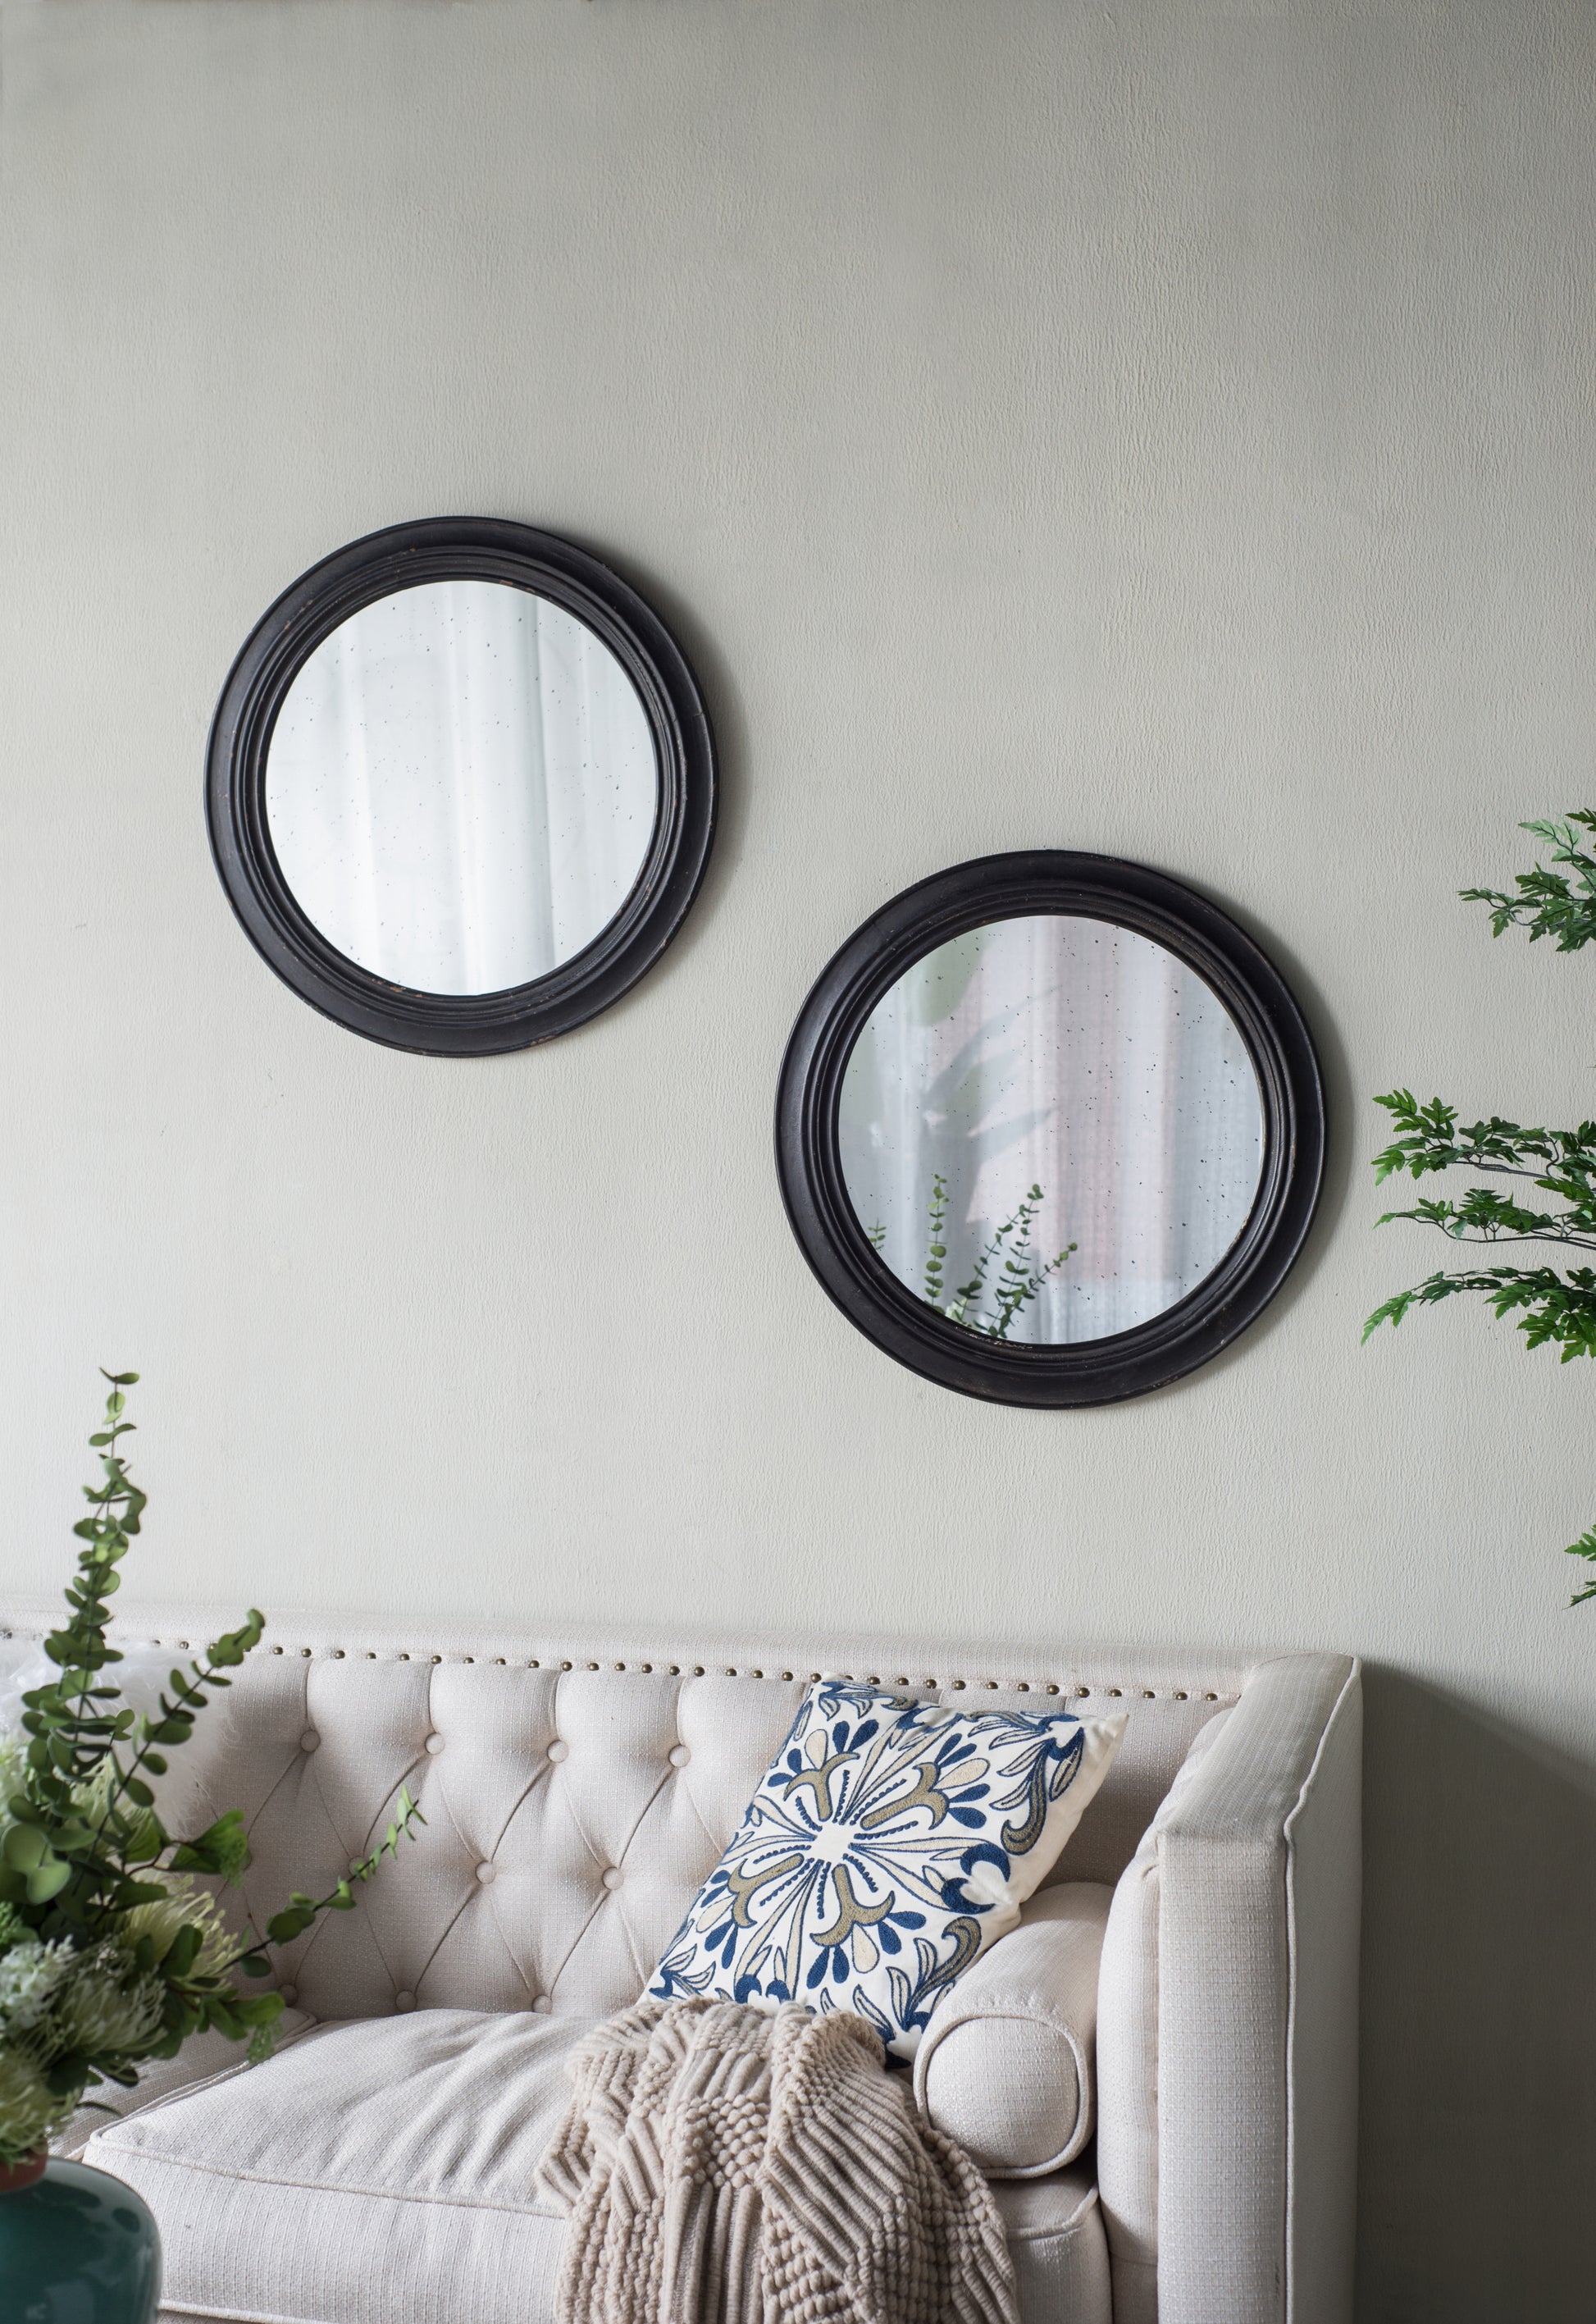 23.5" Circle Wall Mirror with Wooden Black Frame